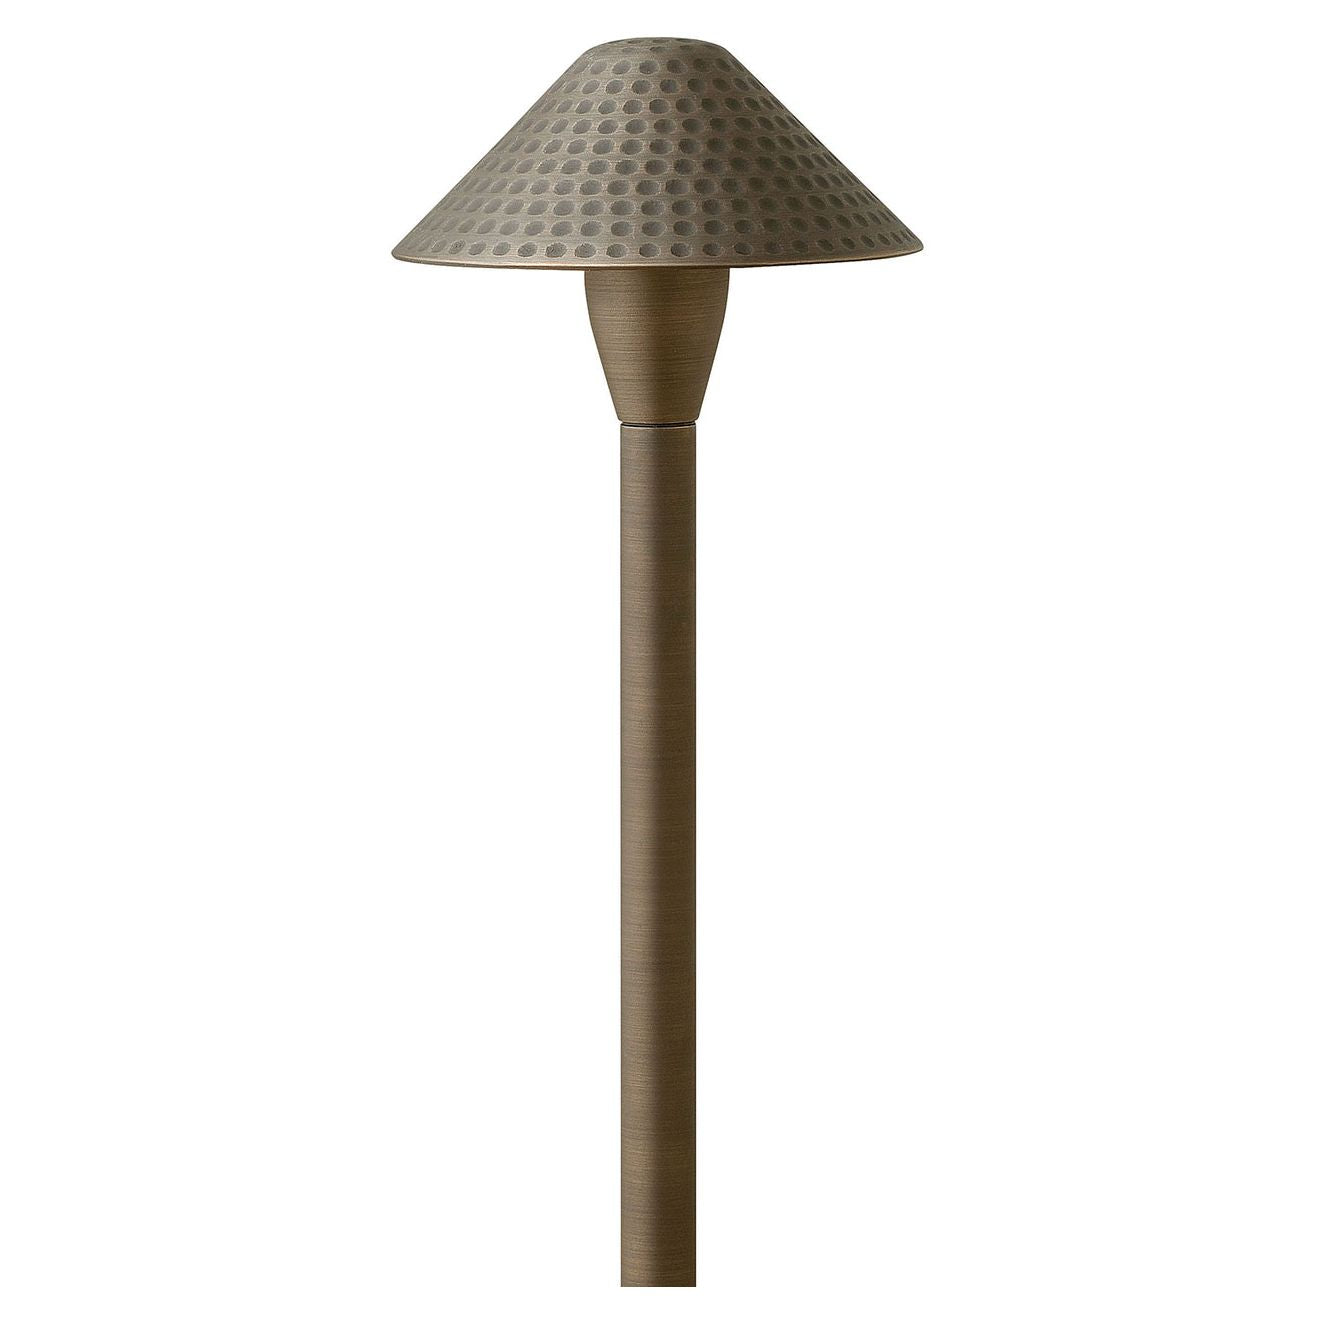 Hinkley 16010MZ-LL - Hardy Island Small Hammered LED Path Light 5" Wide 1 Light Landscape in Matte B